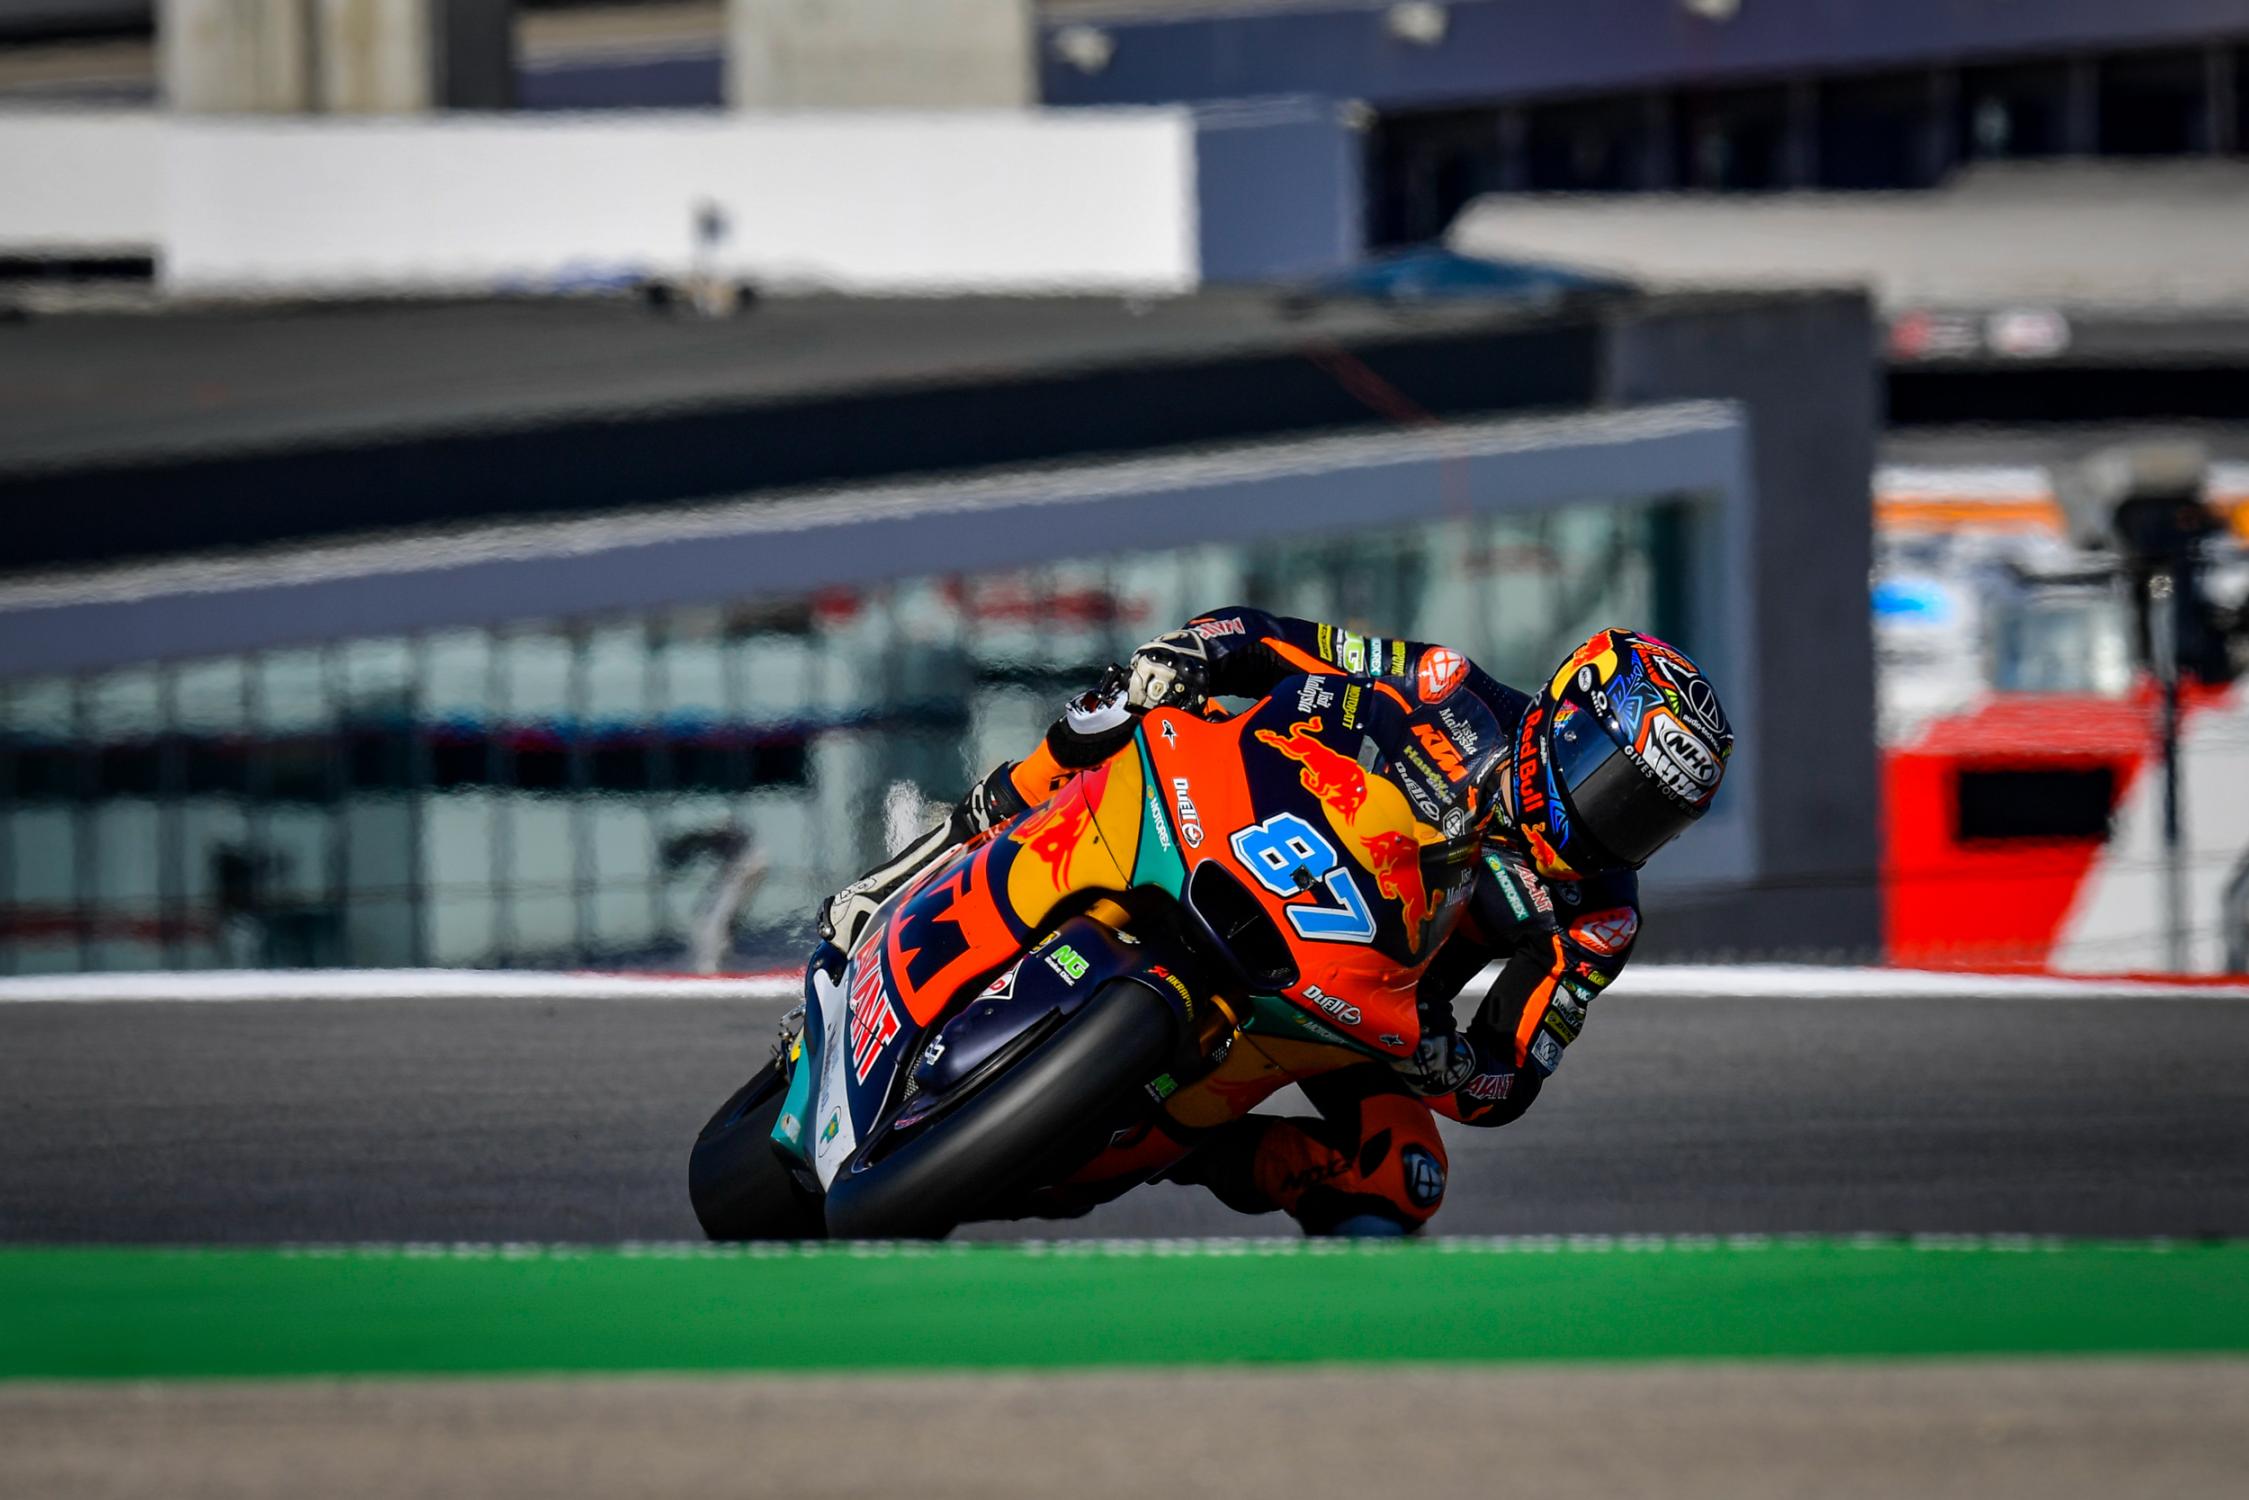 Moto2 Portimao-2 Race: Remy Gardner opens a royal road to the title